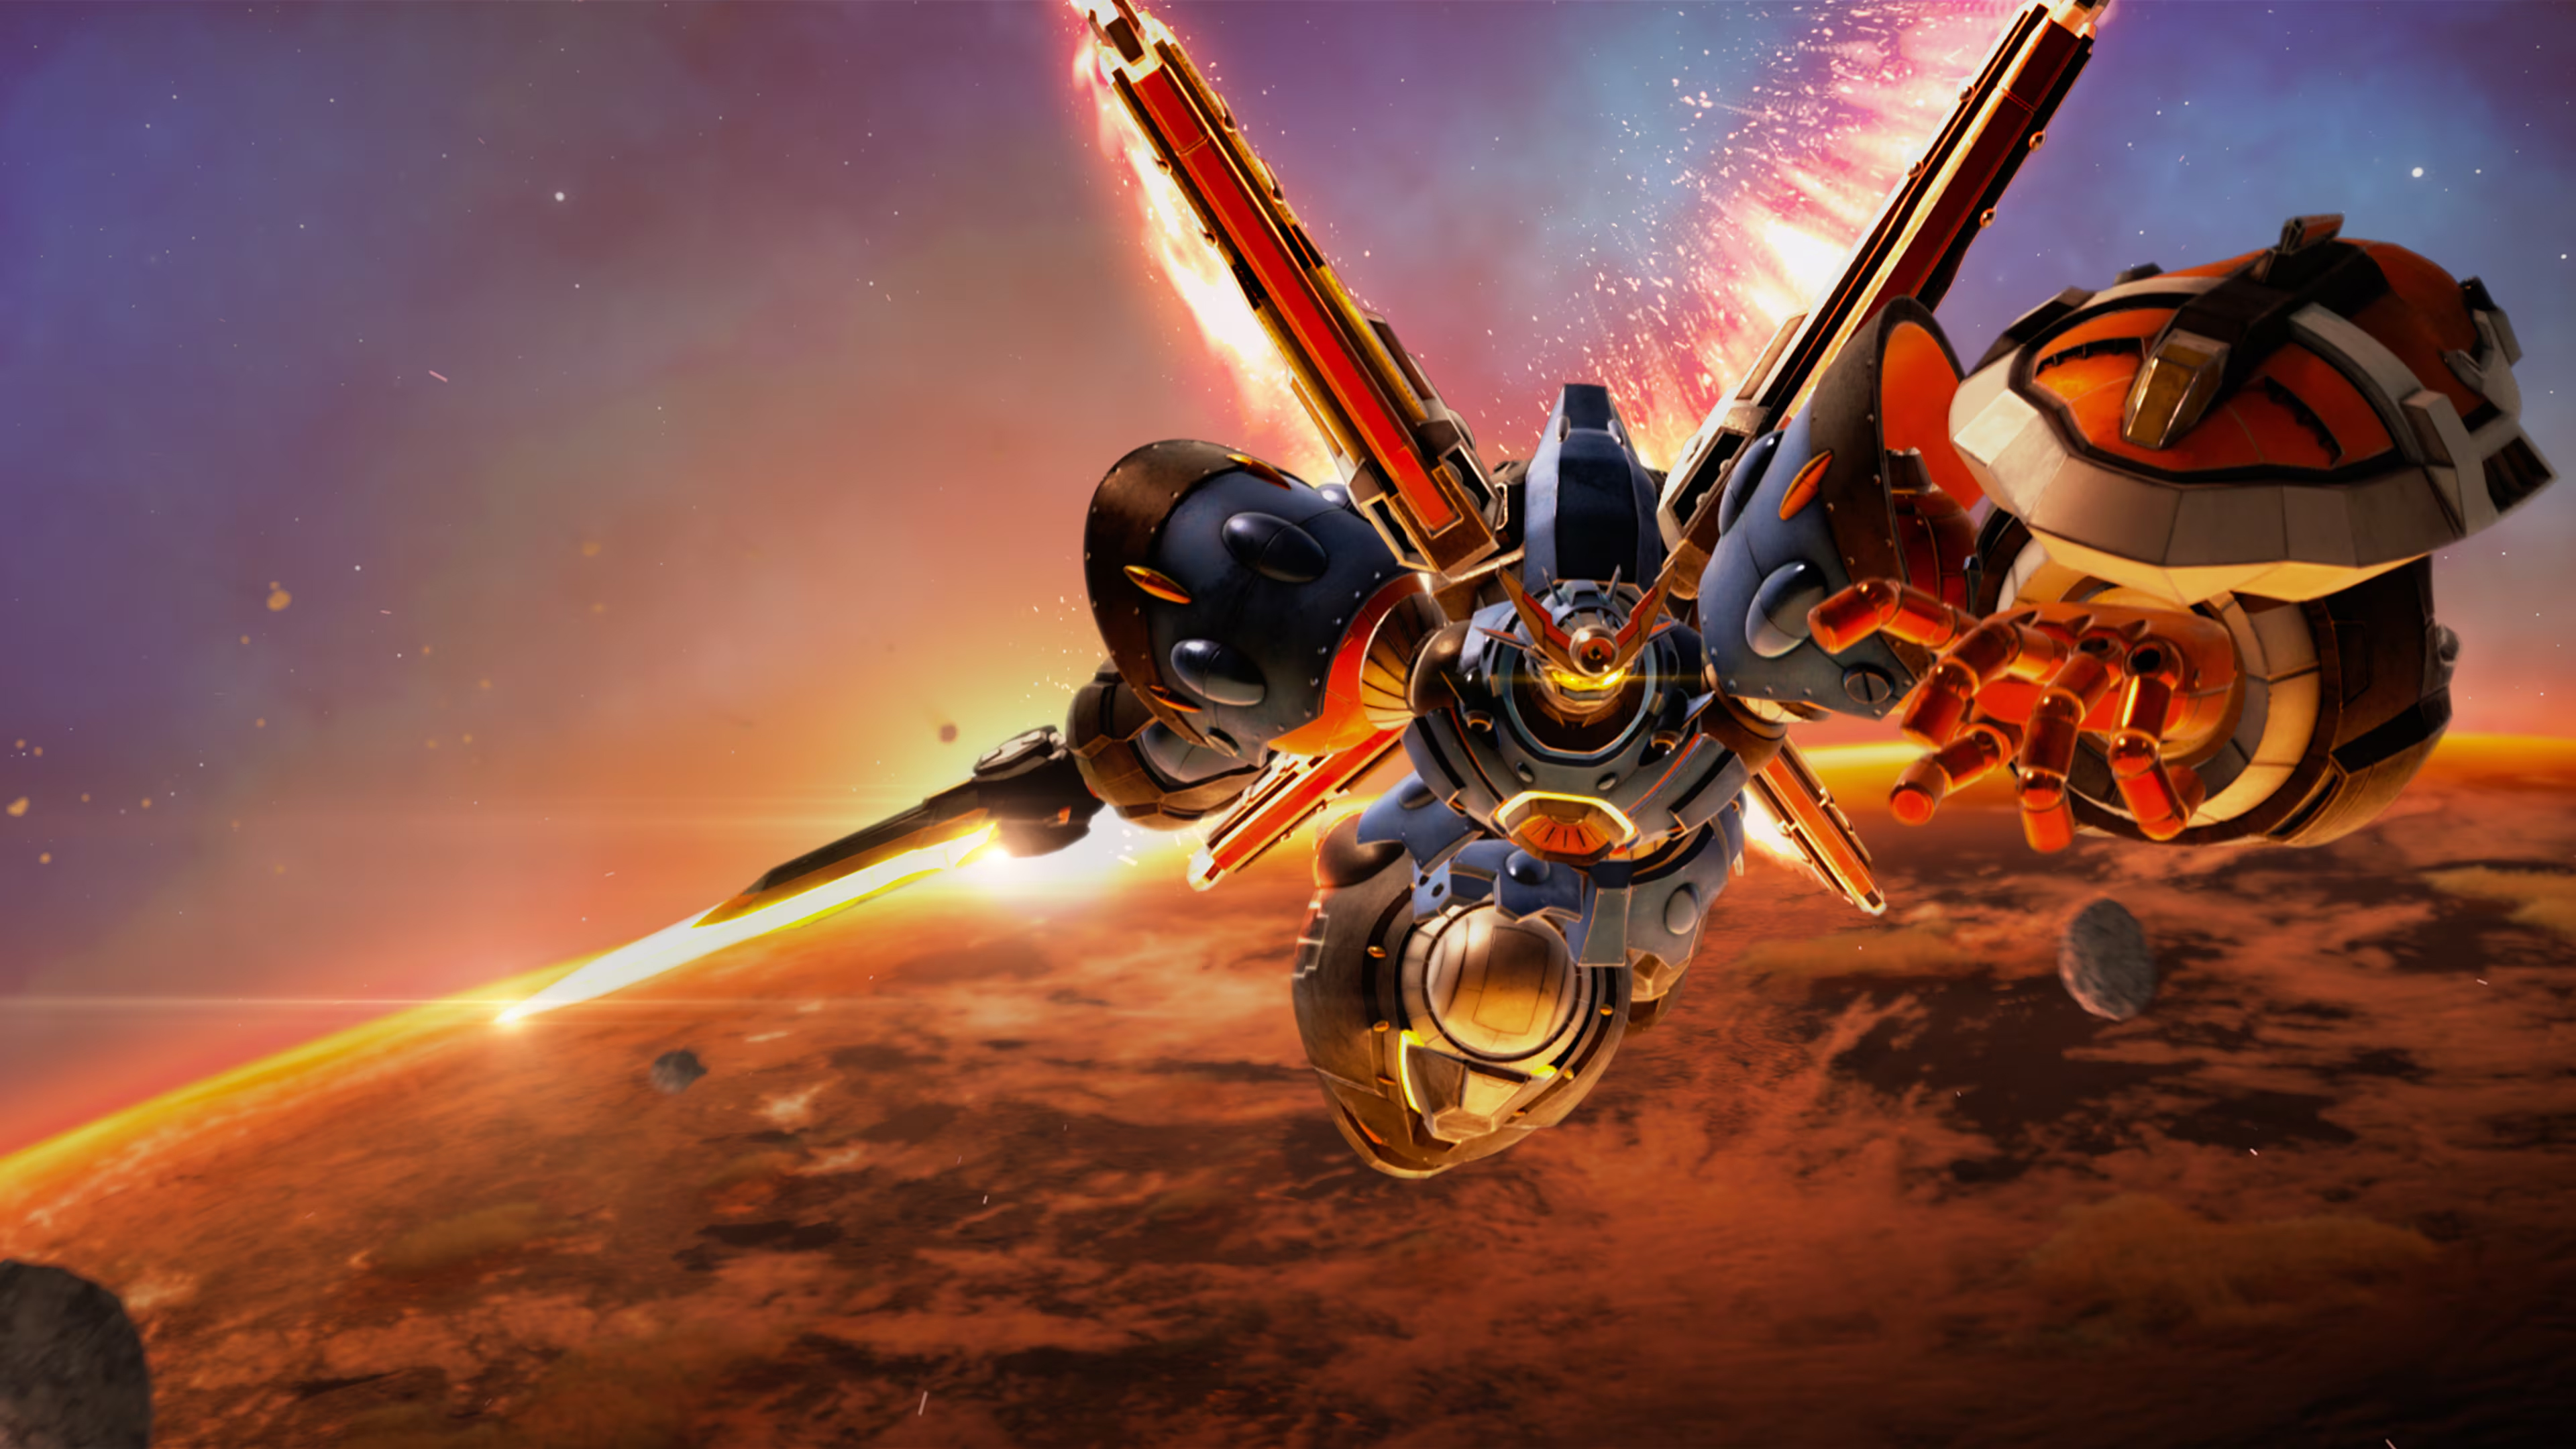 An image of a mech flying in Megaton Musashi.